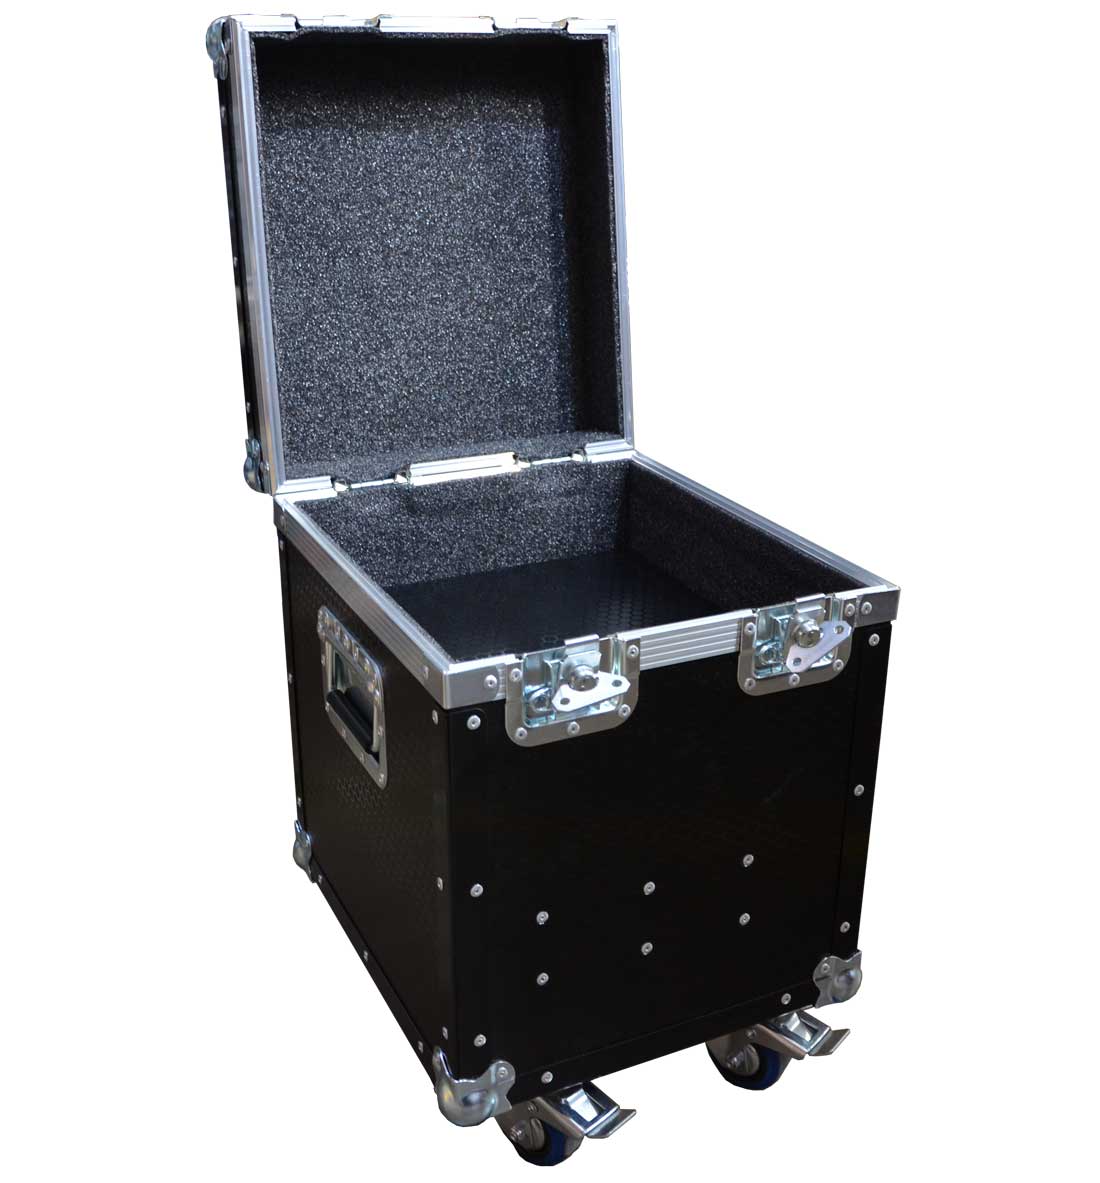 STR Scales Flight Roll Carry Case - Store Pads & Control Box